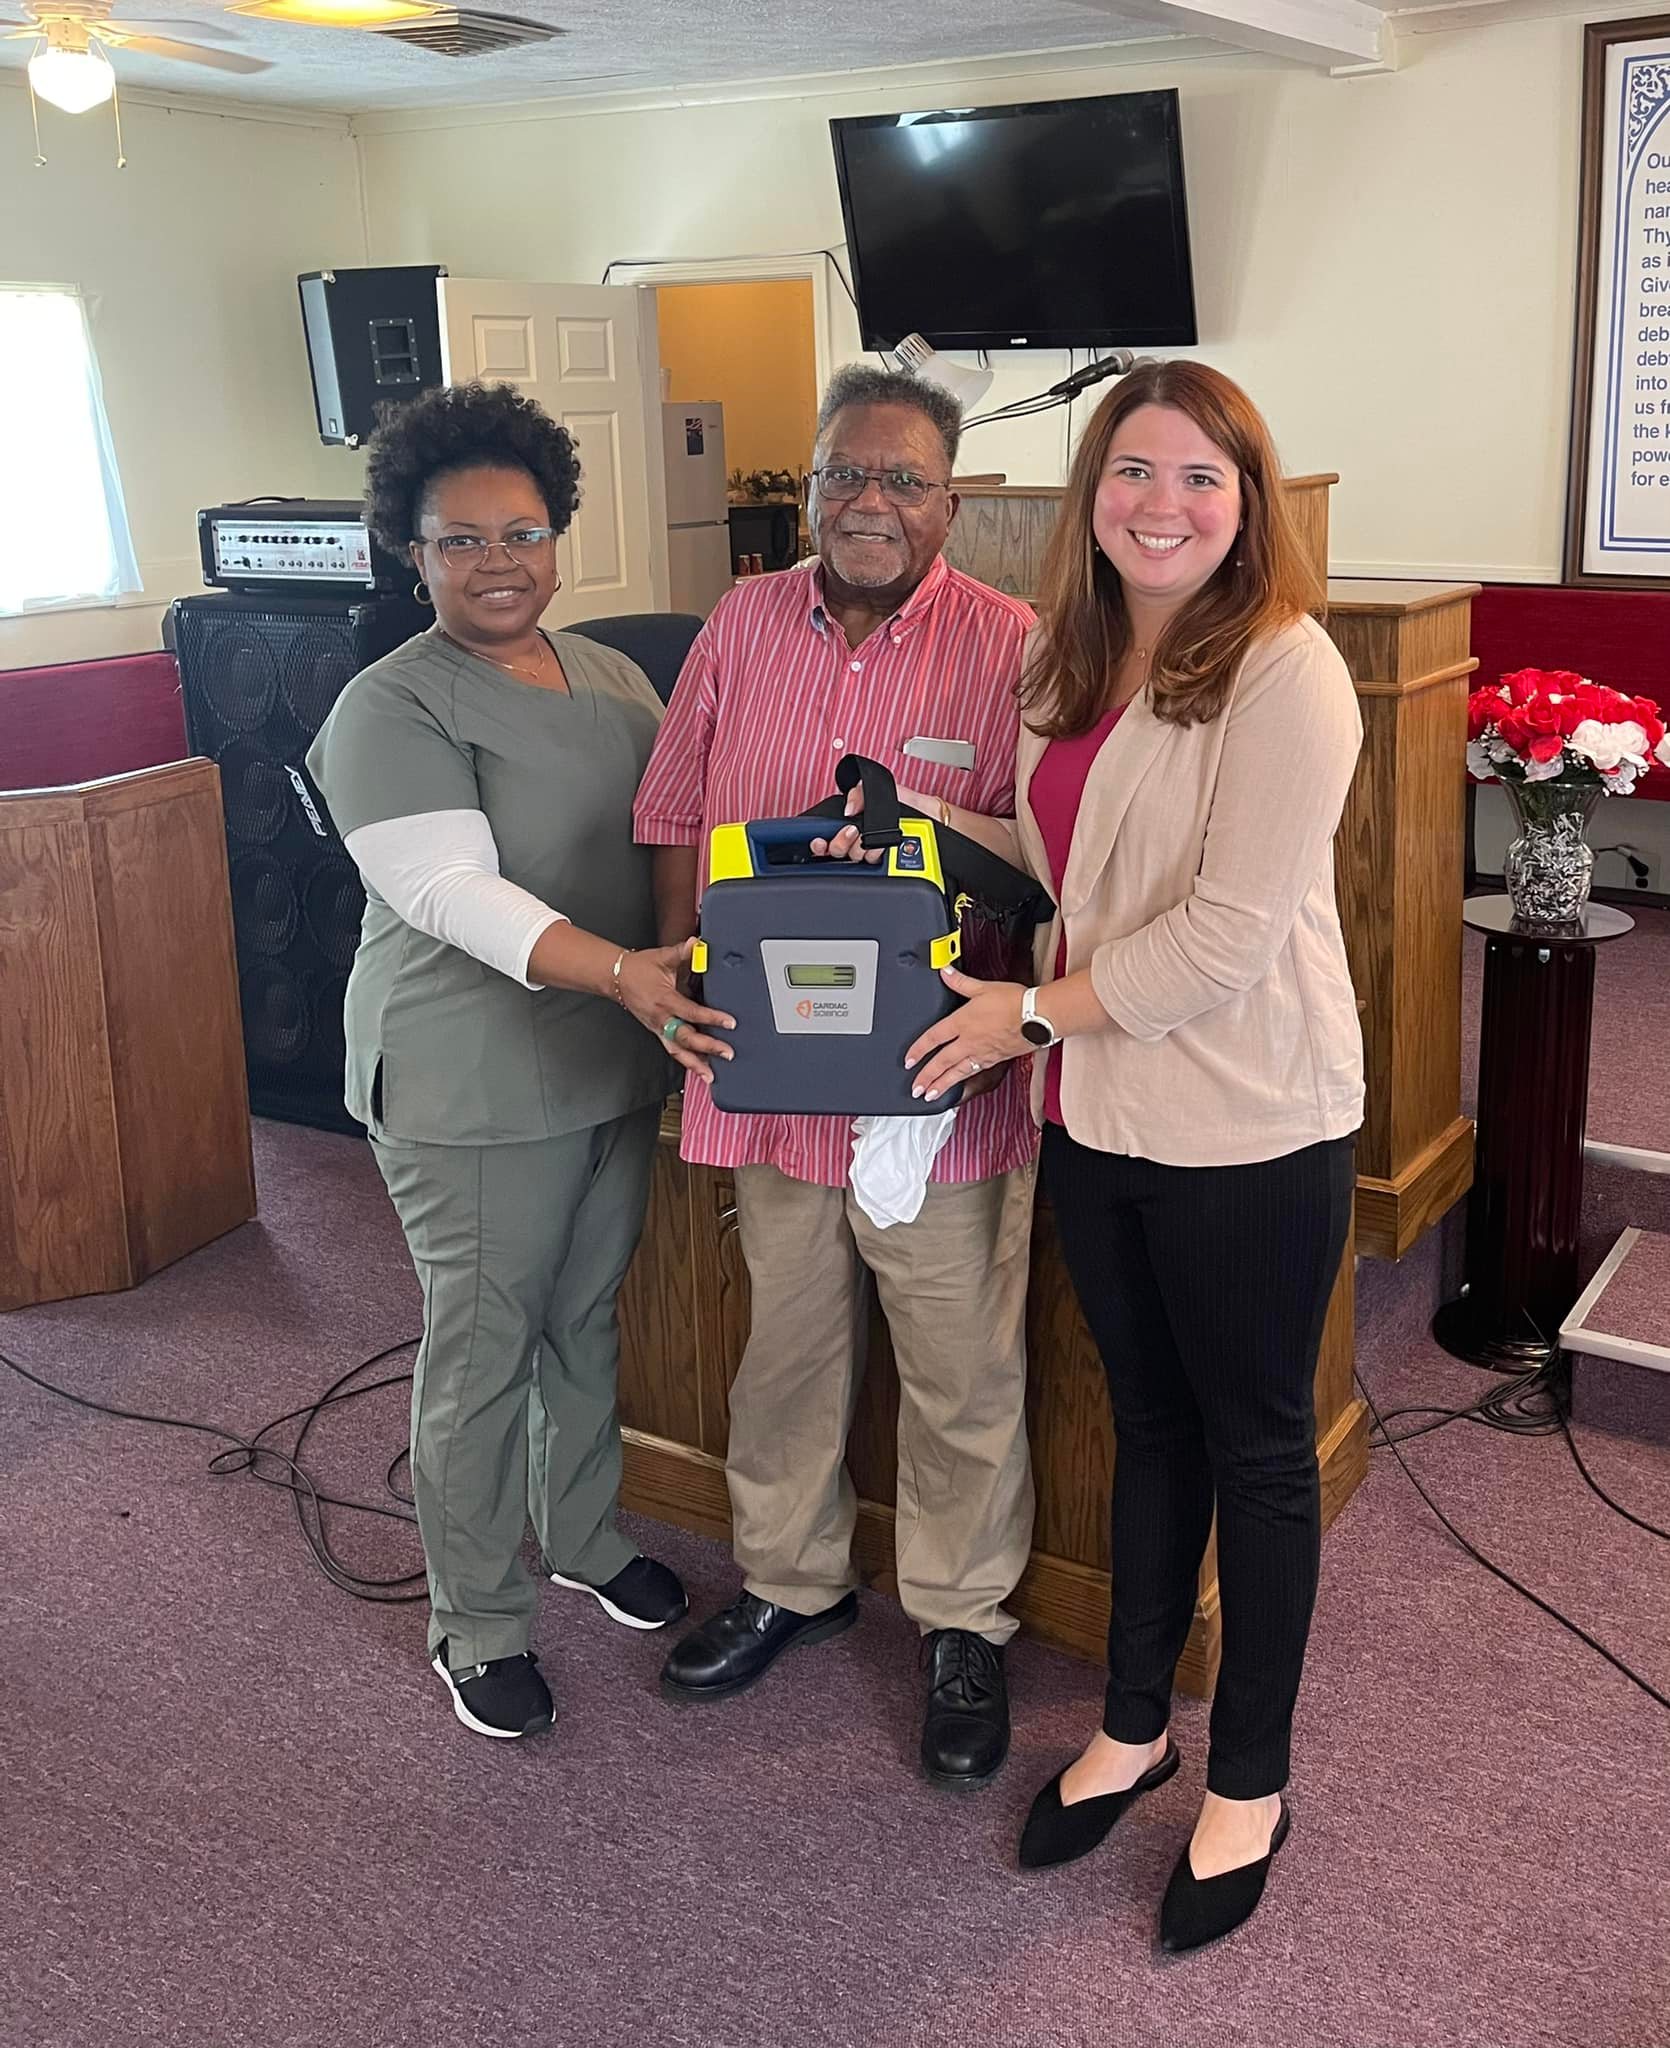 New AED for Day Star Baptist Church